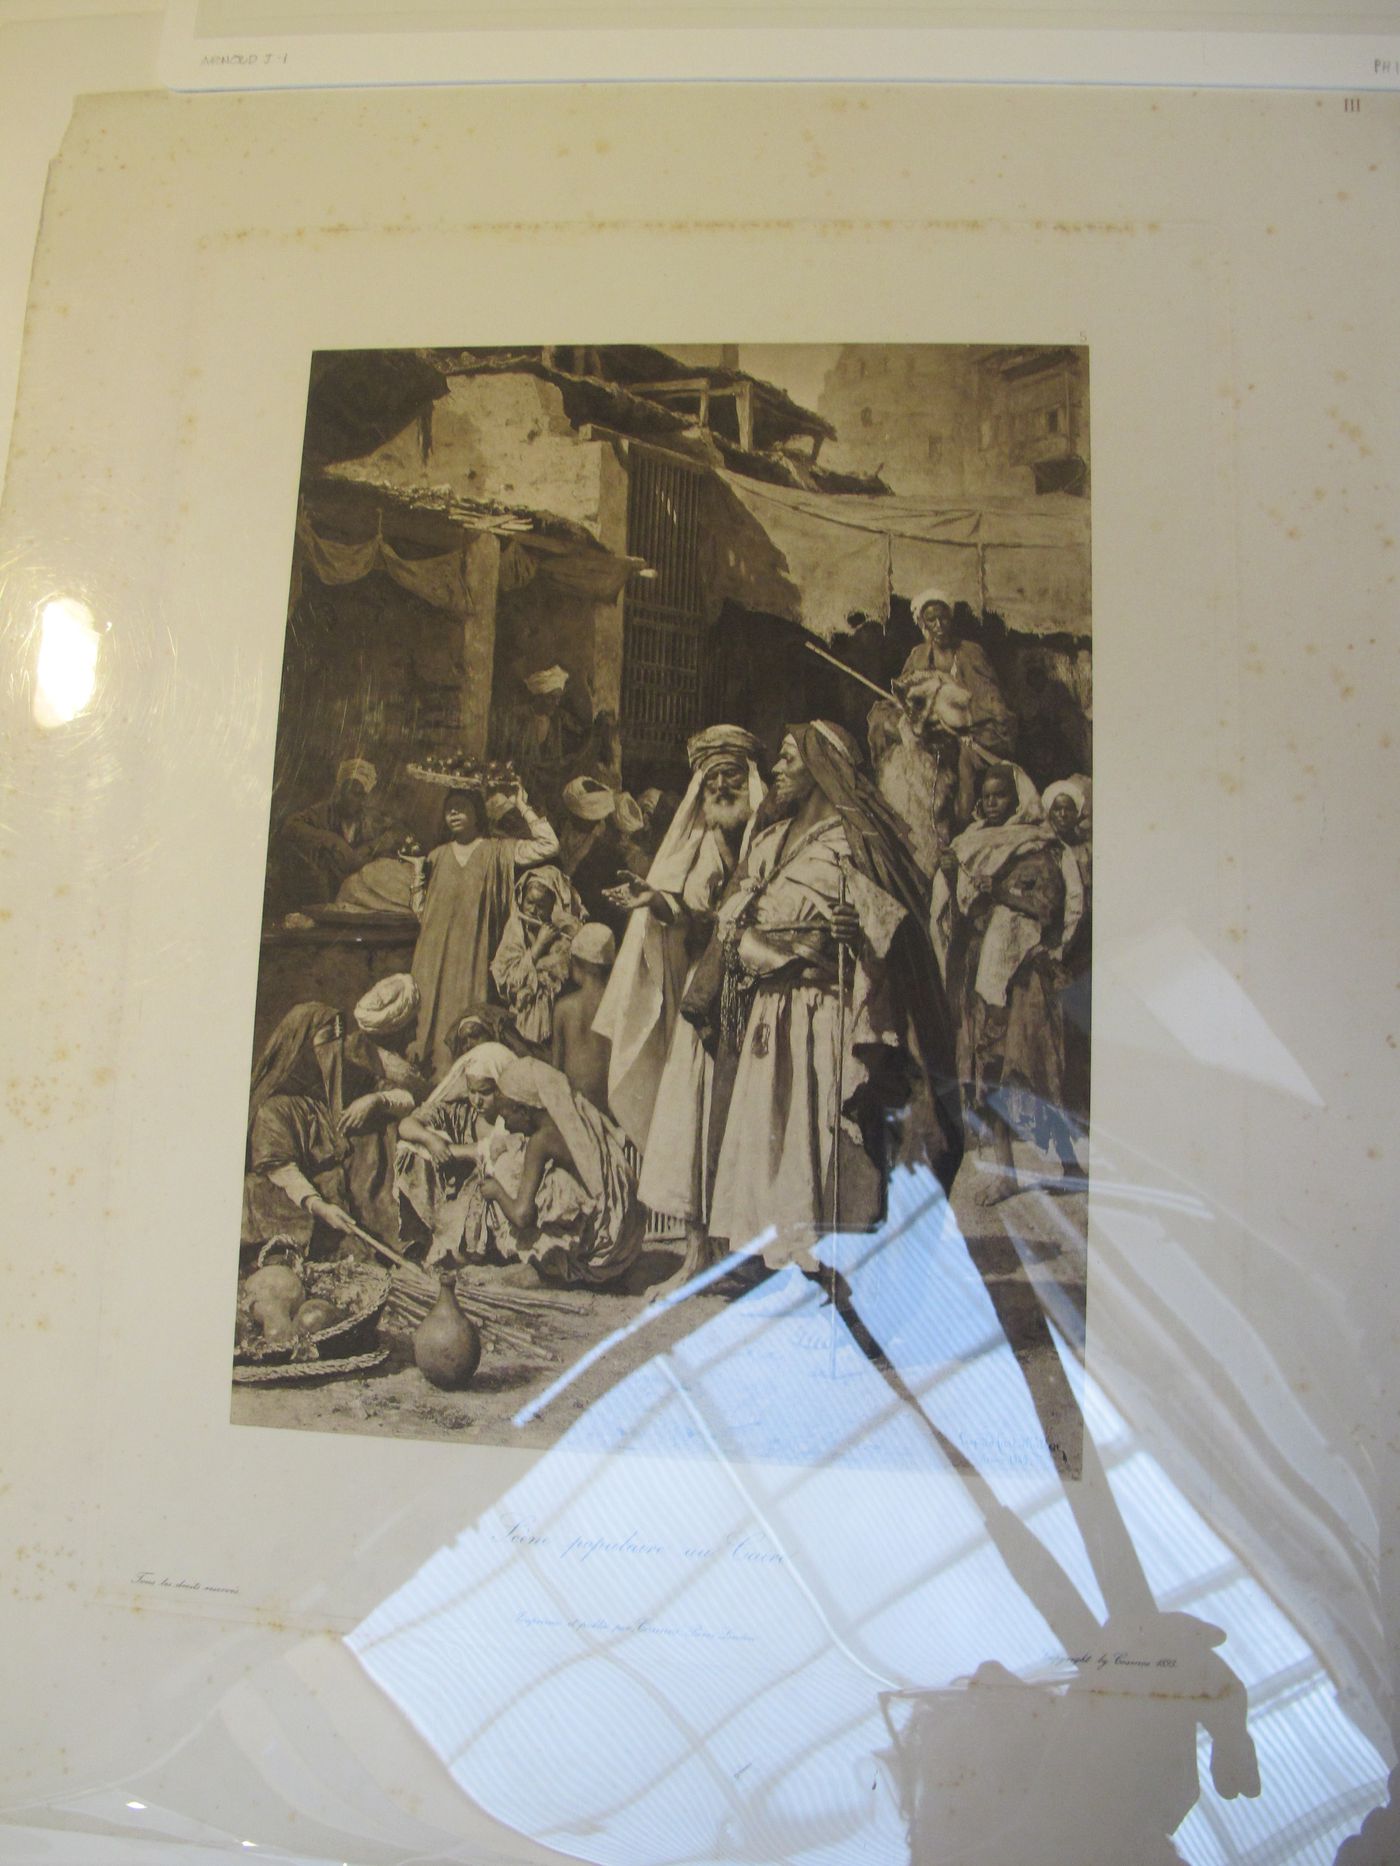 Photograph of a painting  by Leopold Carl Müller depicting a street scene in Cairo in 1880, Egypt